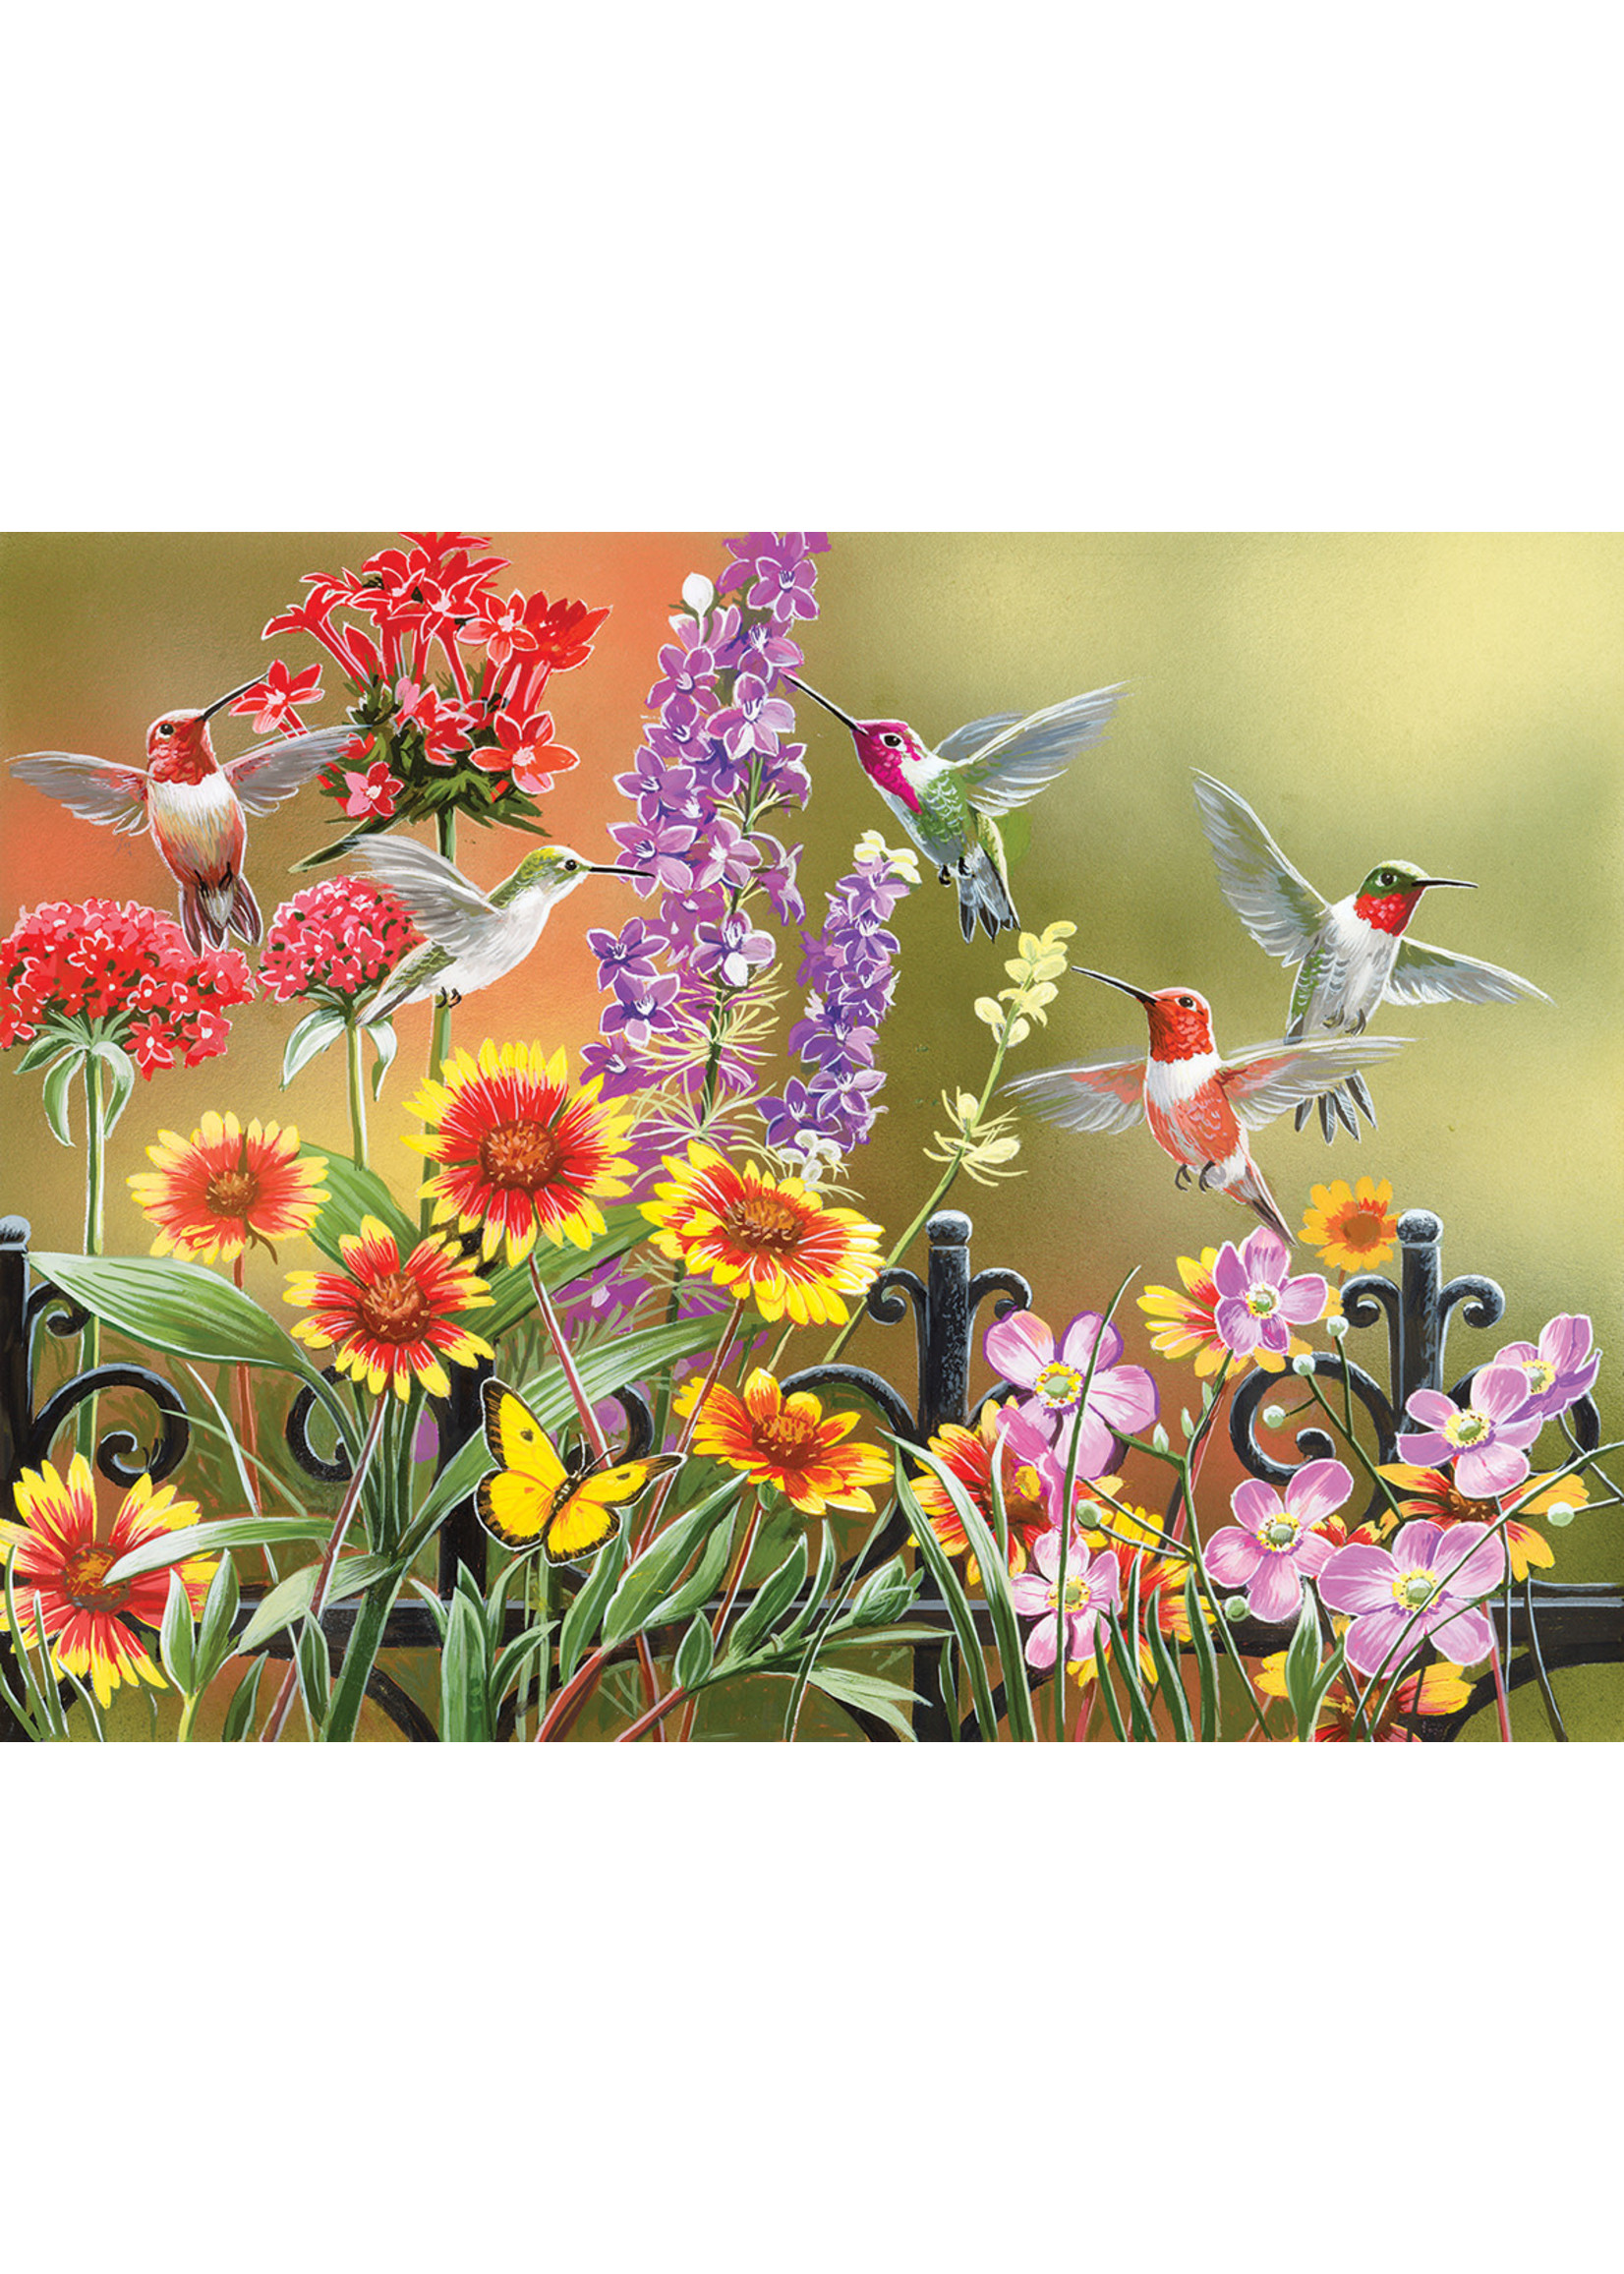 Sunsout Hummingbirds at the Gate Puzzle 500 Pieces